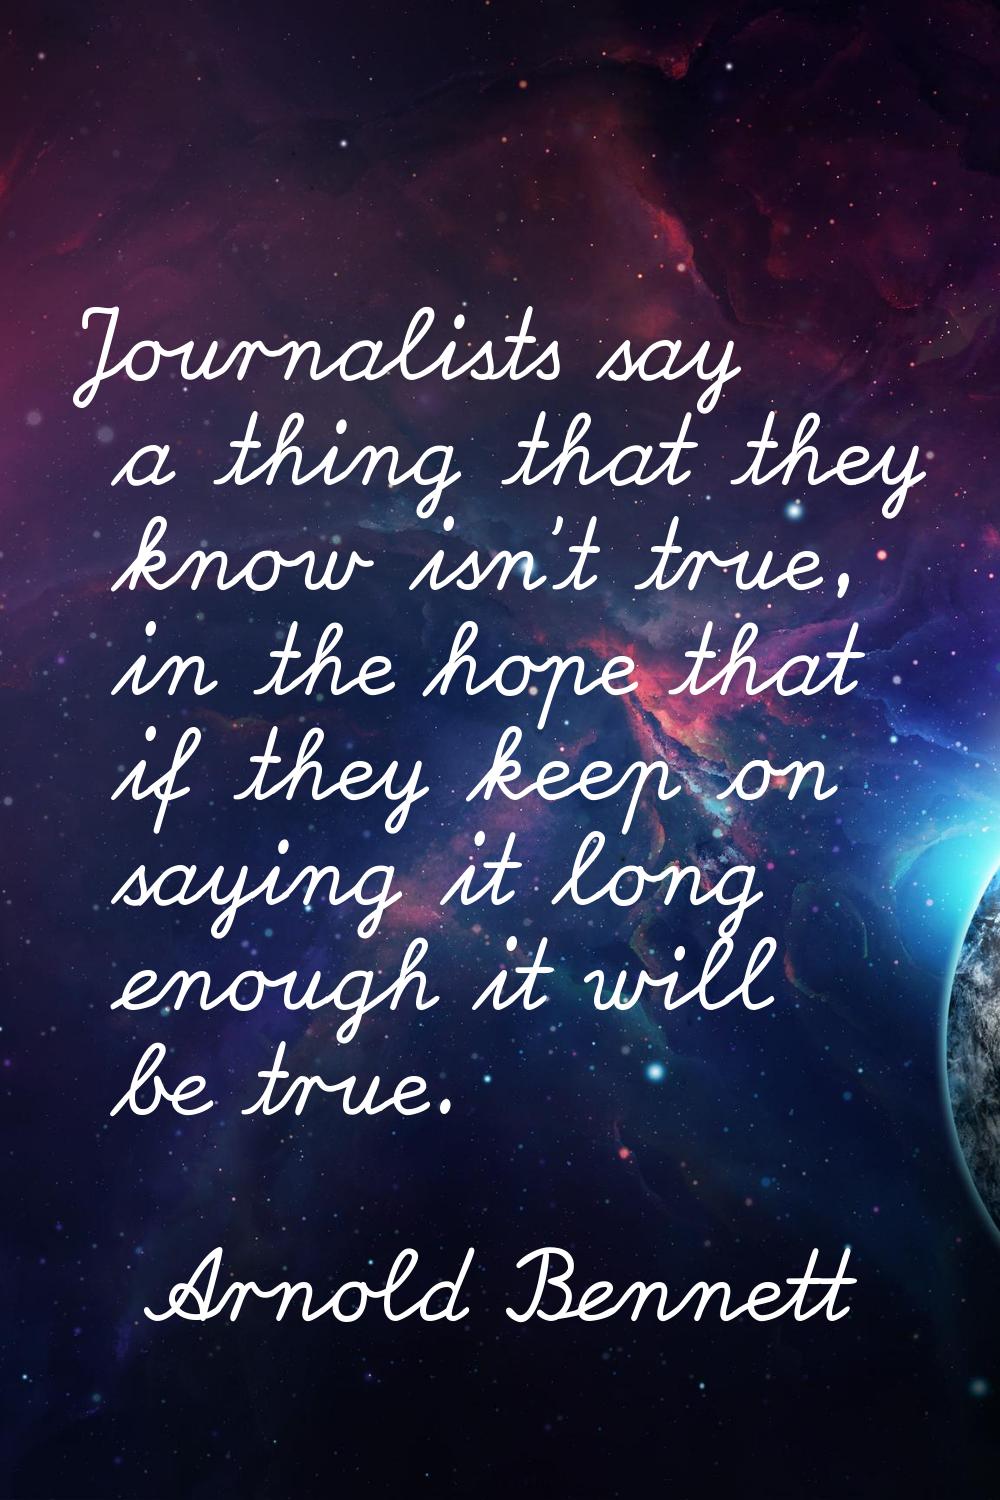 Journalists say a thing that they know isn't true, in the hope that if they keep on saying it long 